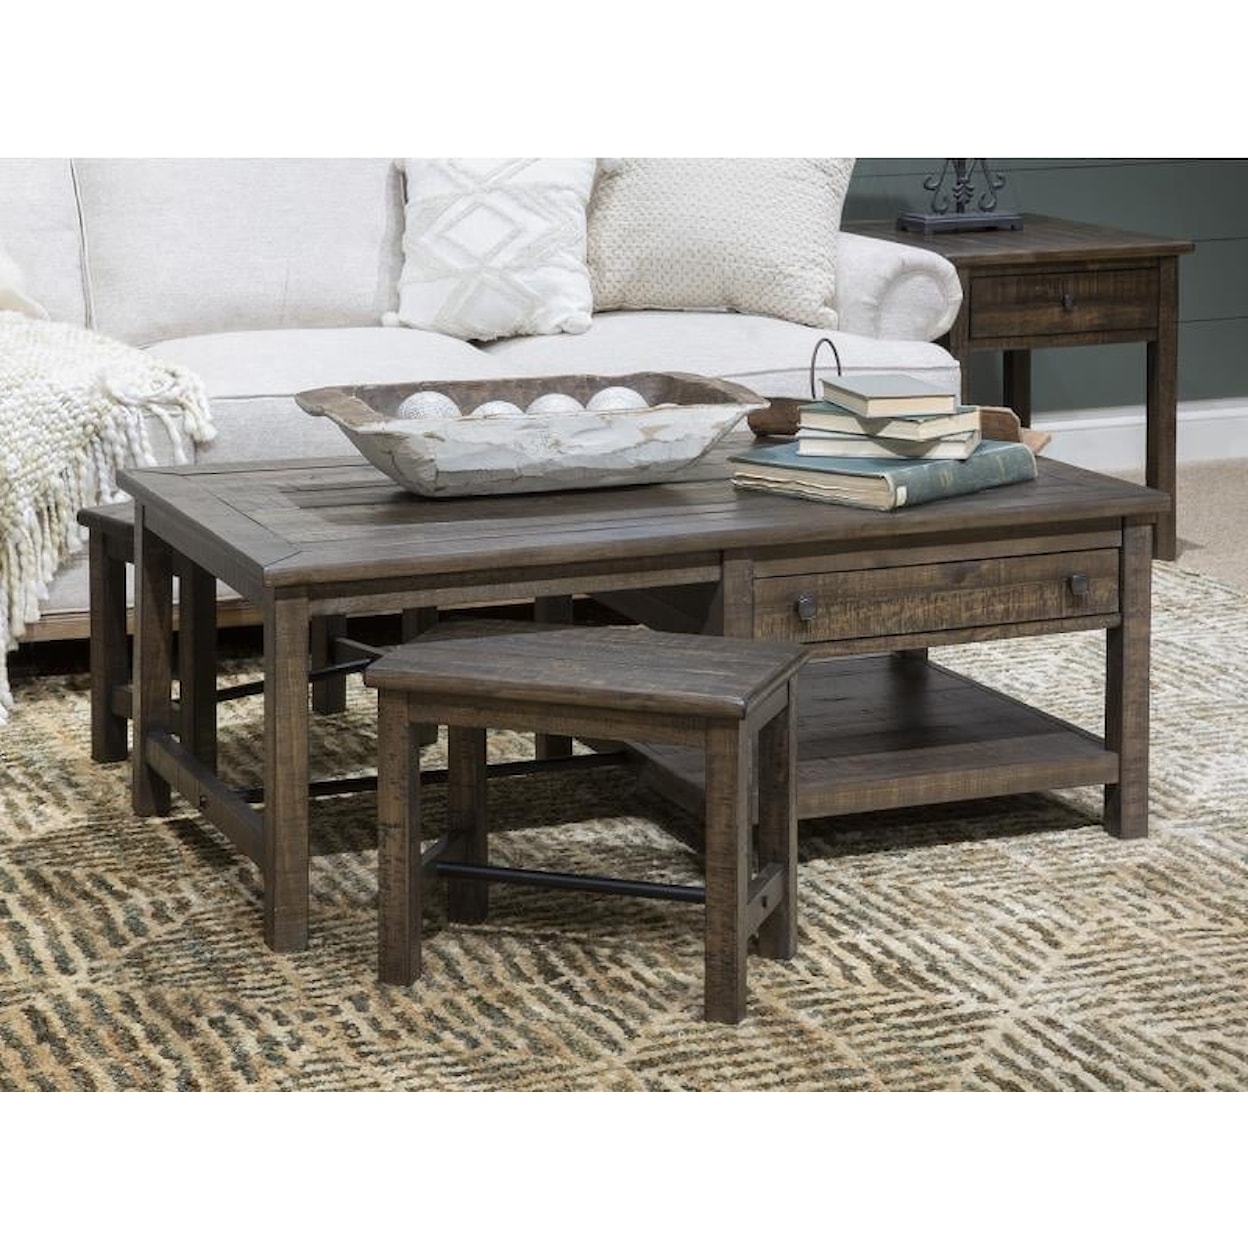 Magnussen Home Smithton Occasional Tables Rectangular Cocktail Table with Stools 